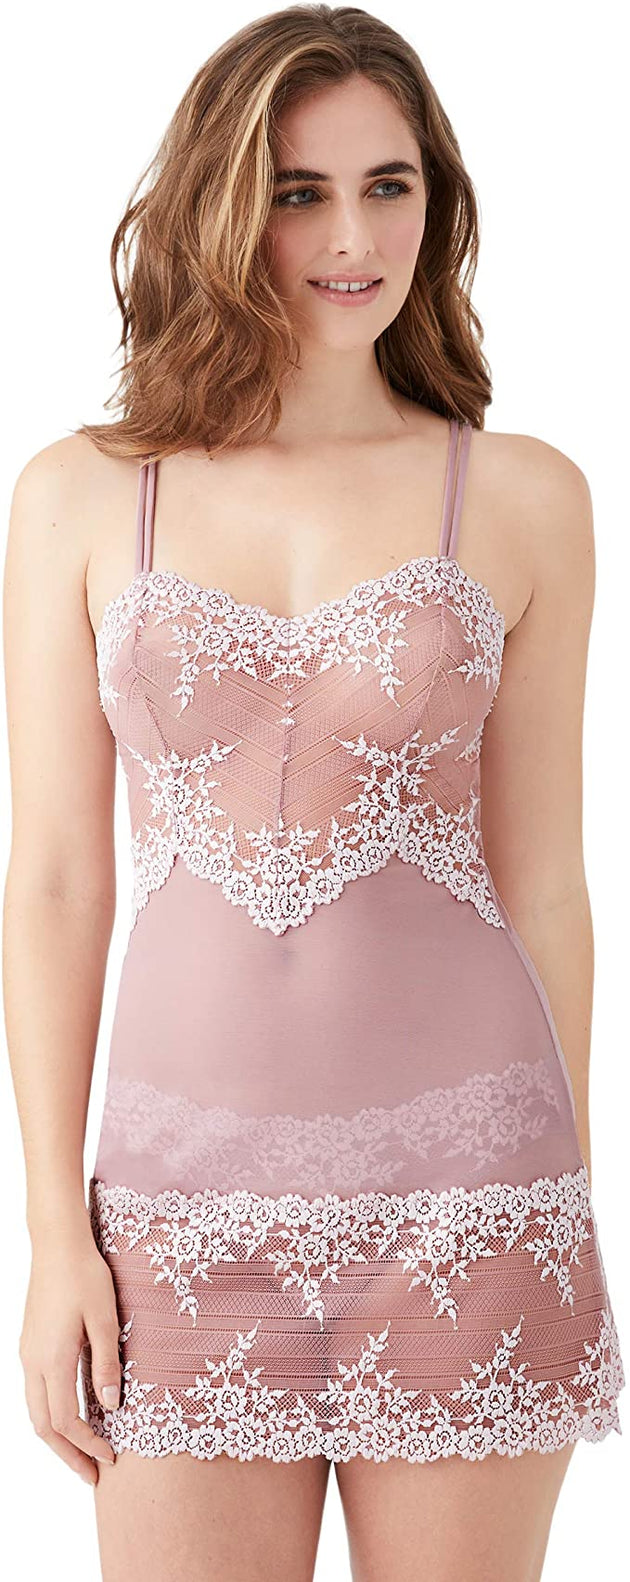 Wacoal Embrace Lace Chemise 814191 Delicious White – My Top Drawer